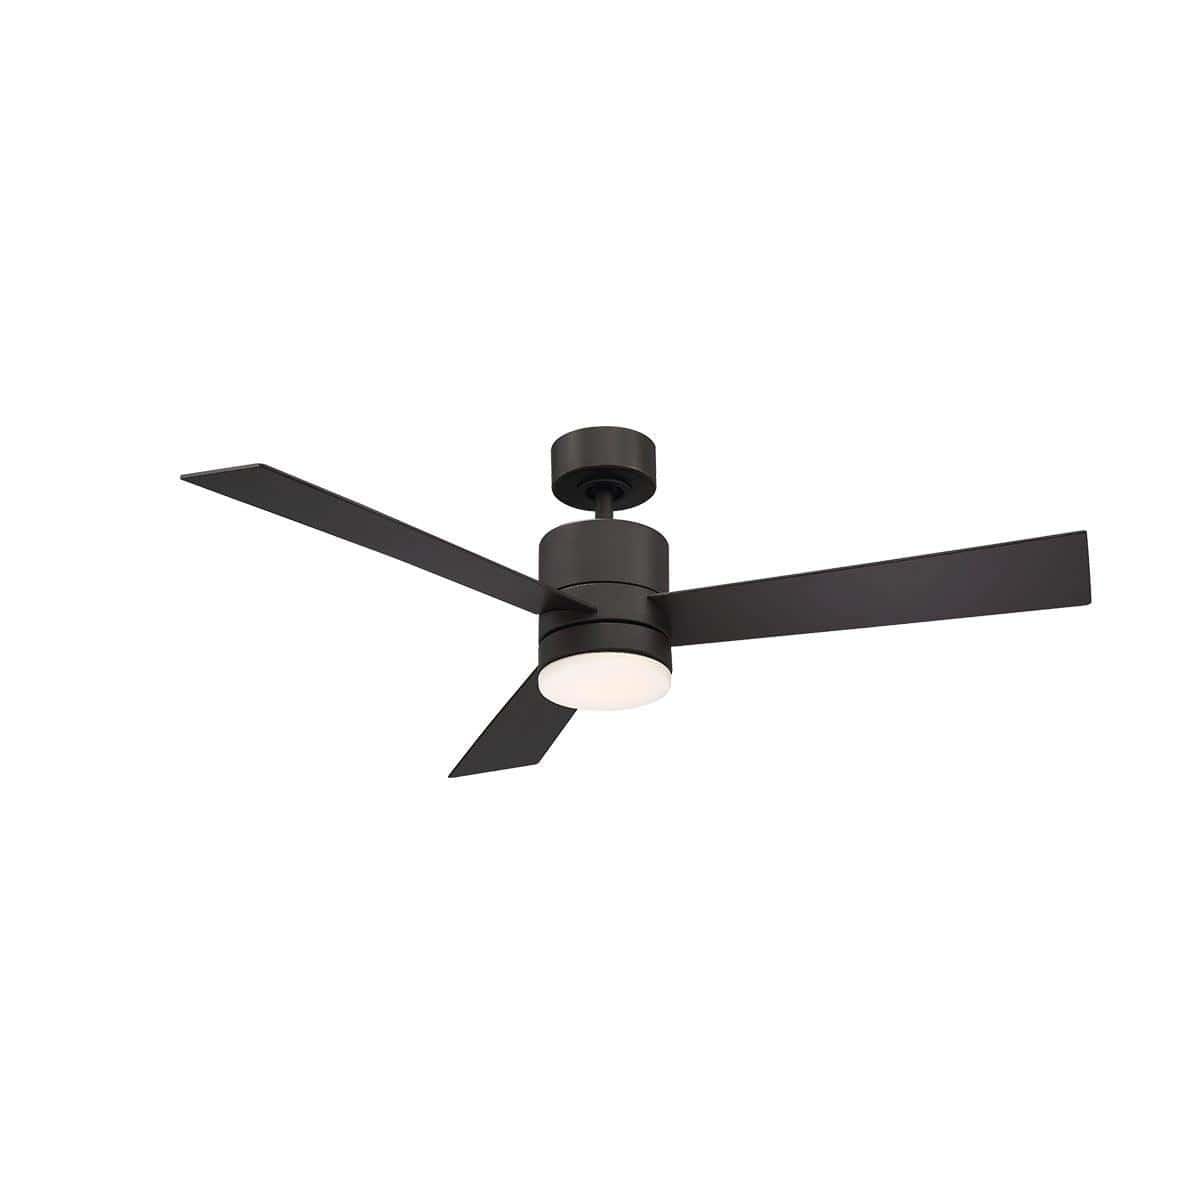 Modern Forms - Axis Ceiling Fan - FR-W1803-52L-MB | Montreal Lighting & Hardware